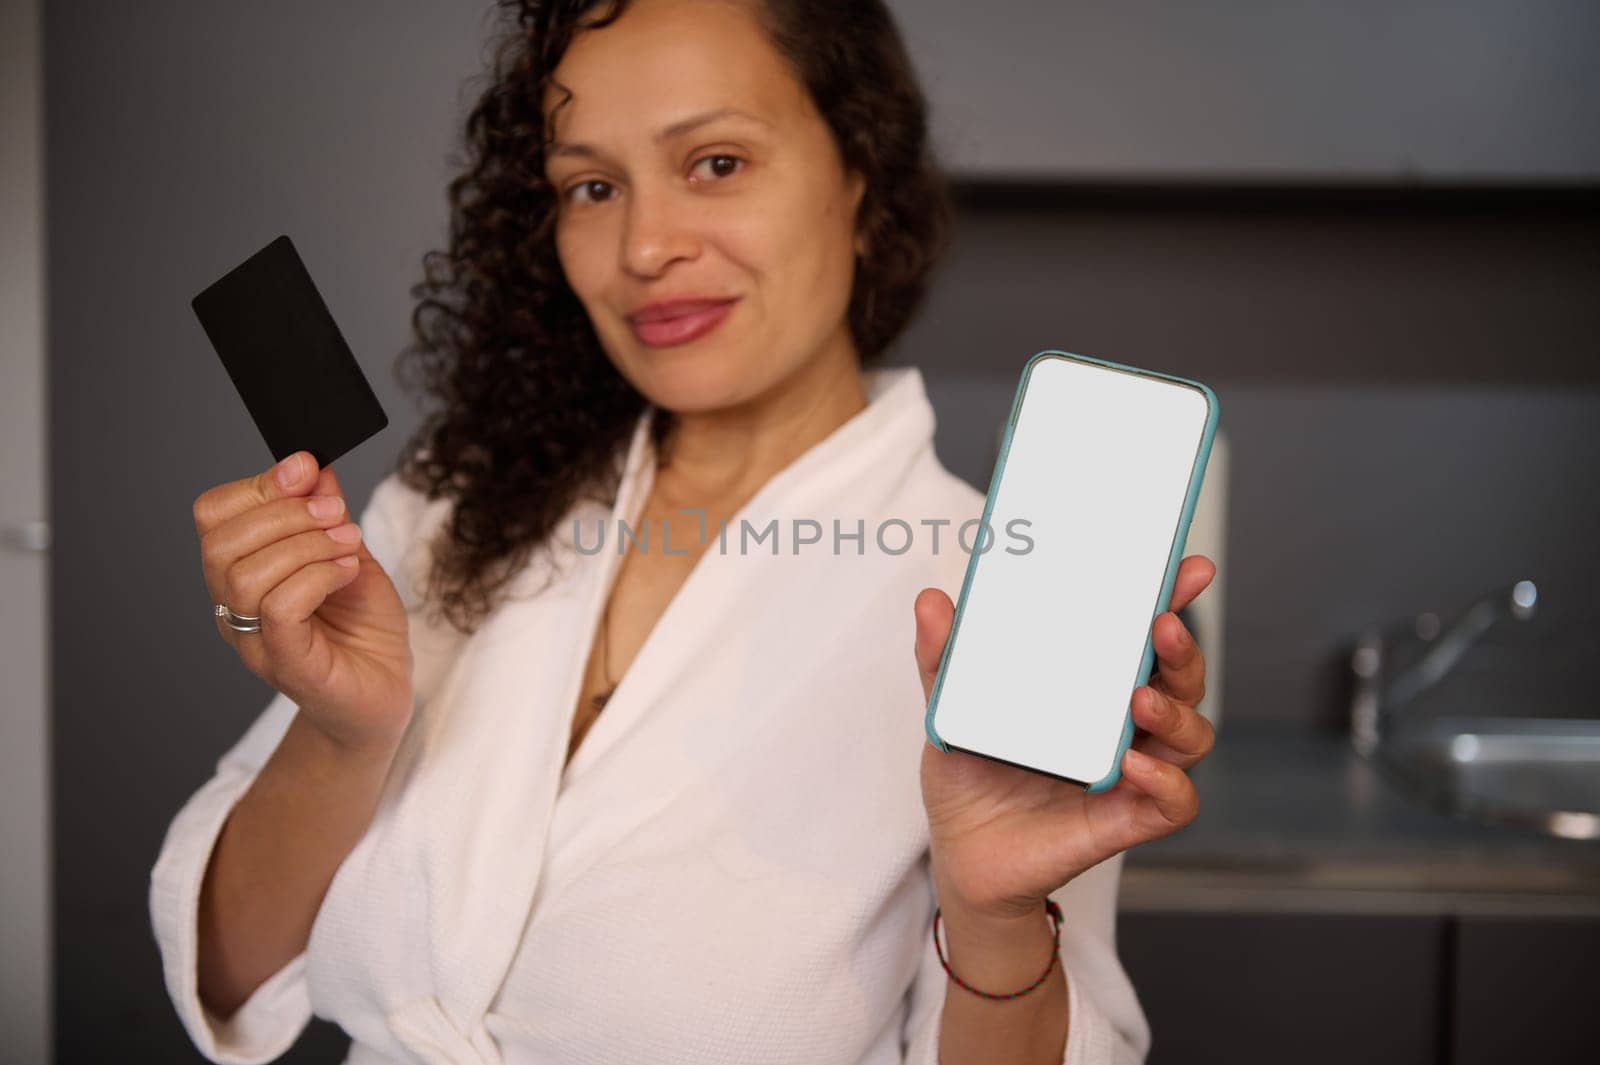 Young woman holds and shows at camera blank black credit card and smartphone with white empty mockup digital screen, makes online payments, transfers money via internet mobile banking or application by artgf